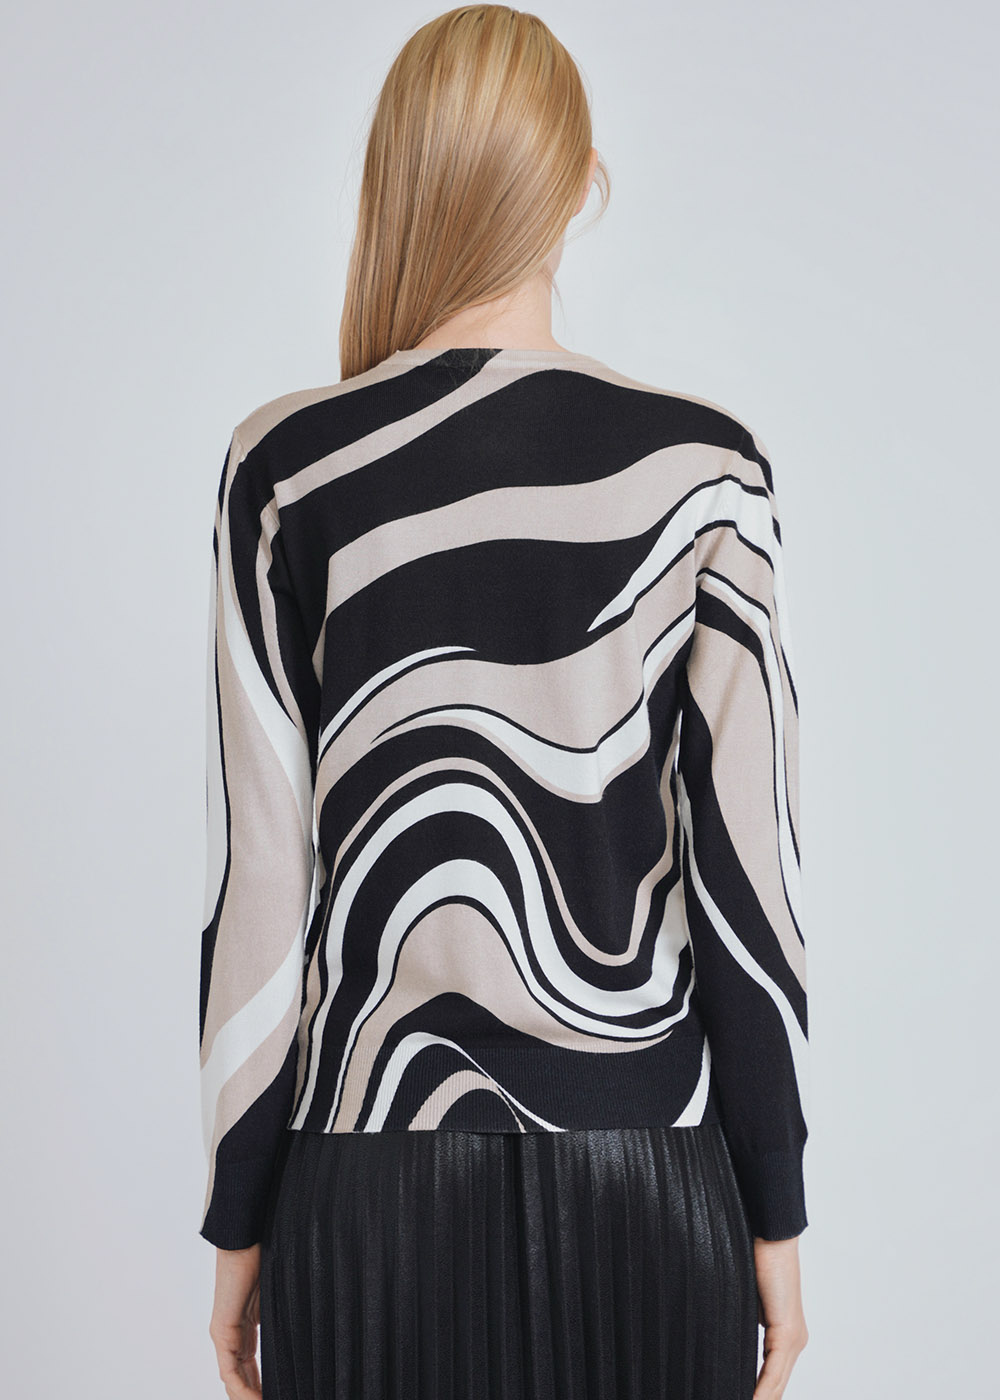 Cosmic Creations: Abstract Art on Sweater